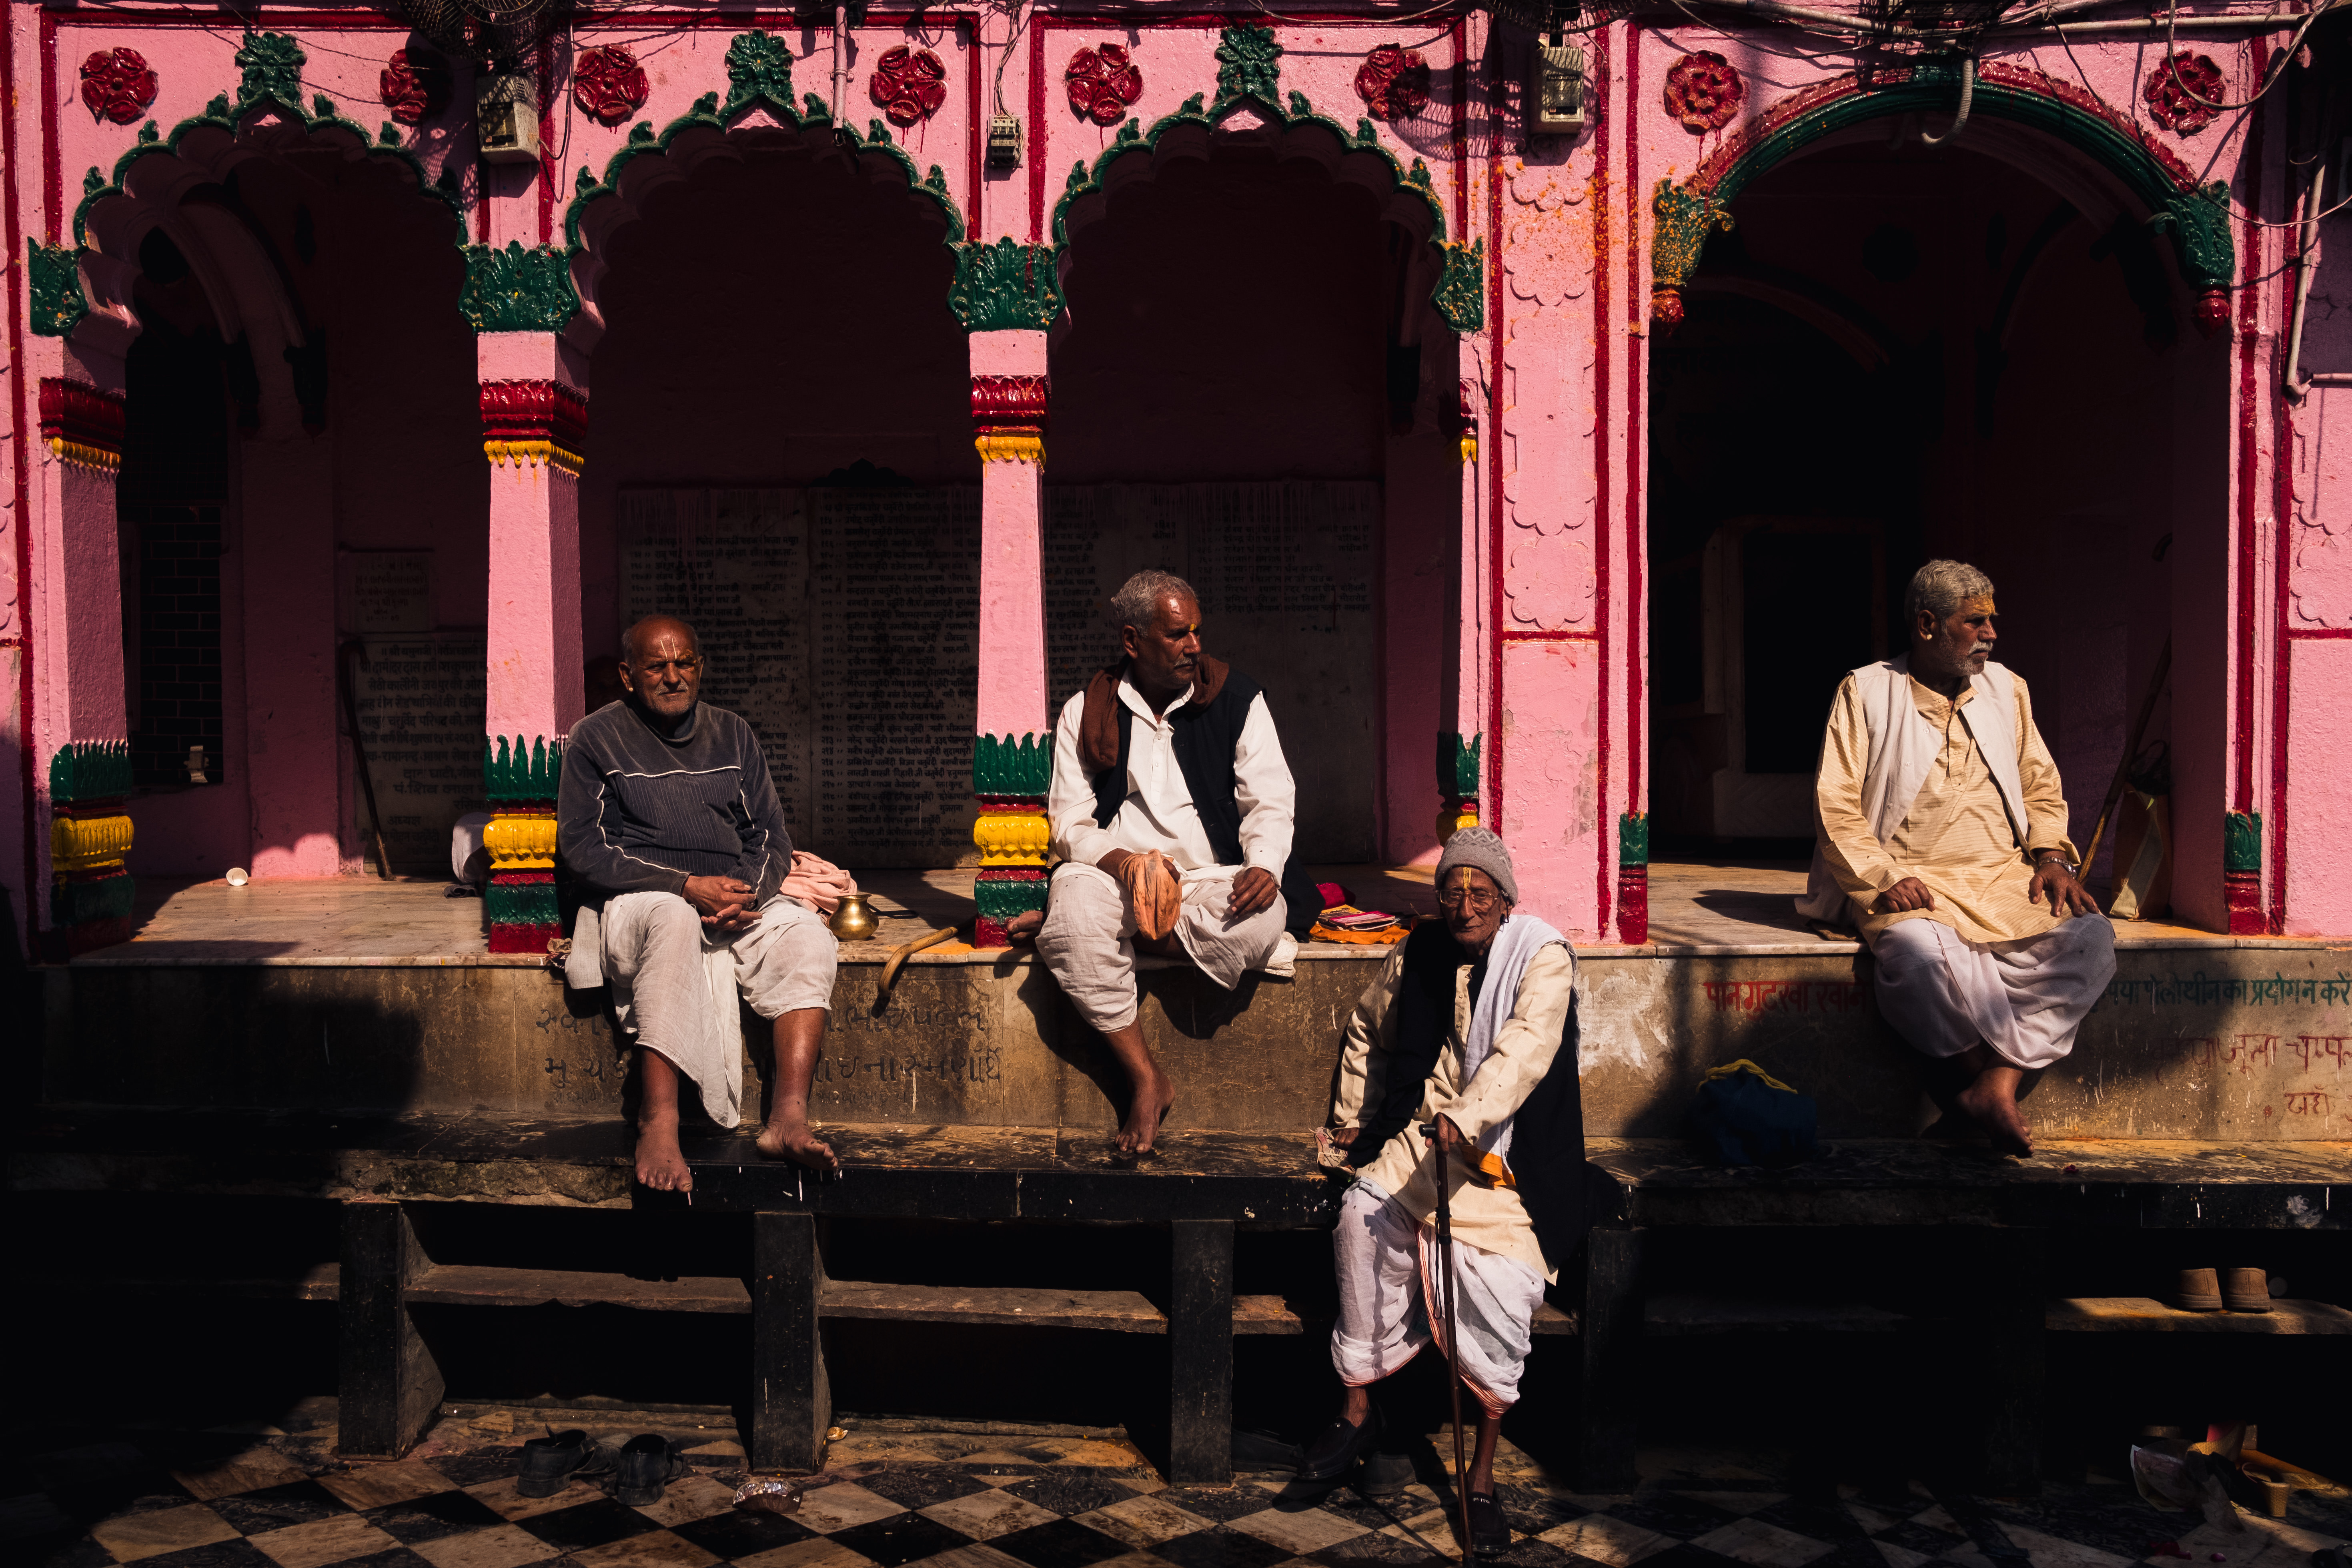 India Street Photography During Holi Festival. Men sitting and taking by pink wall. Images by Jason Vinson